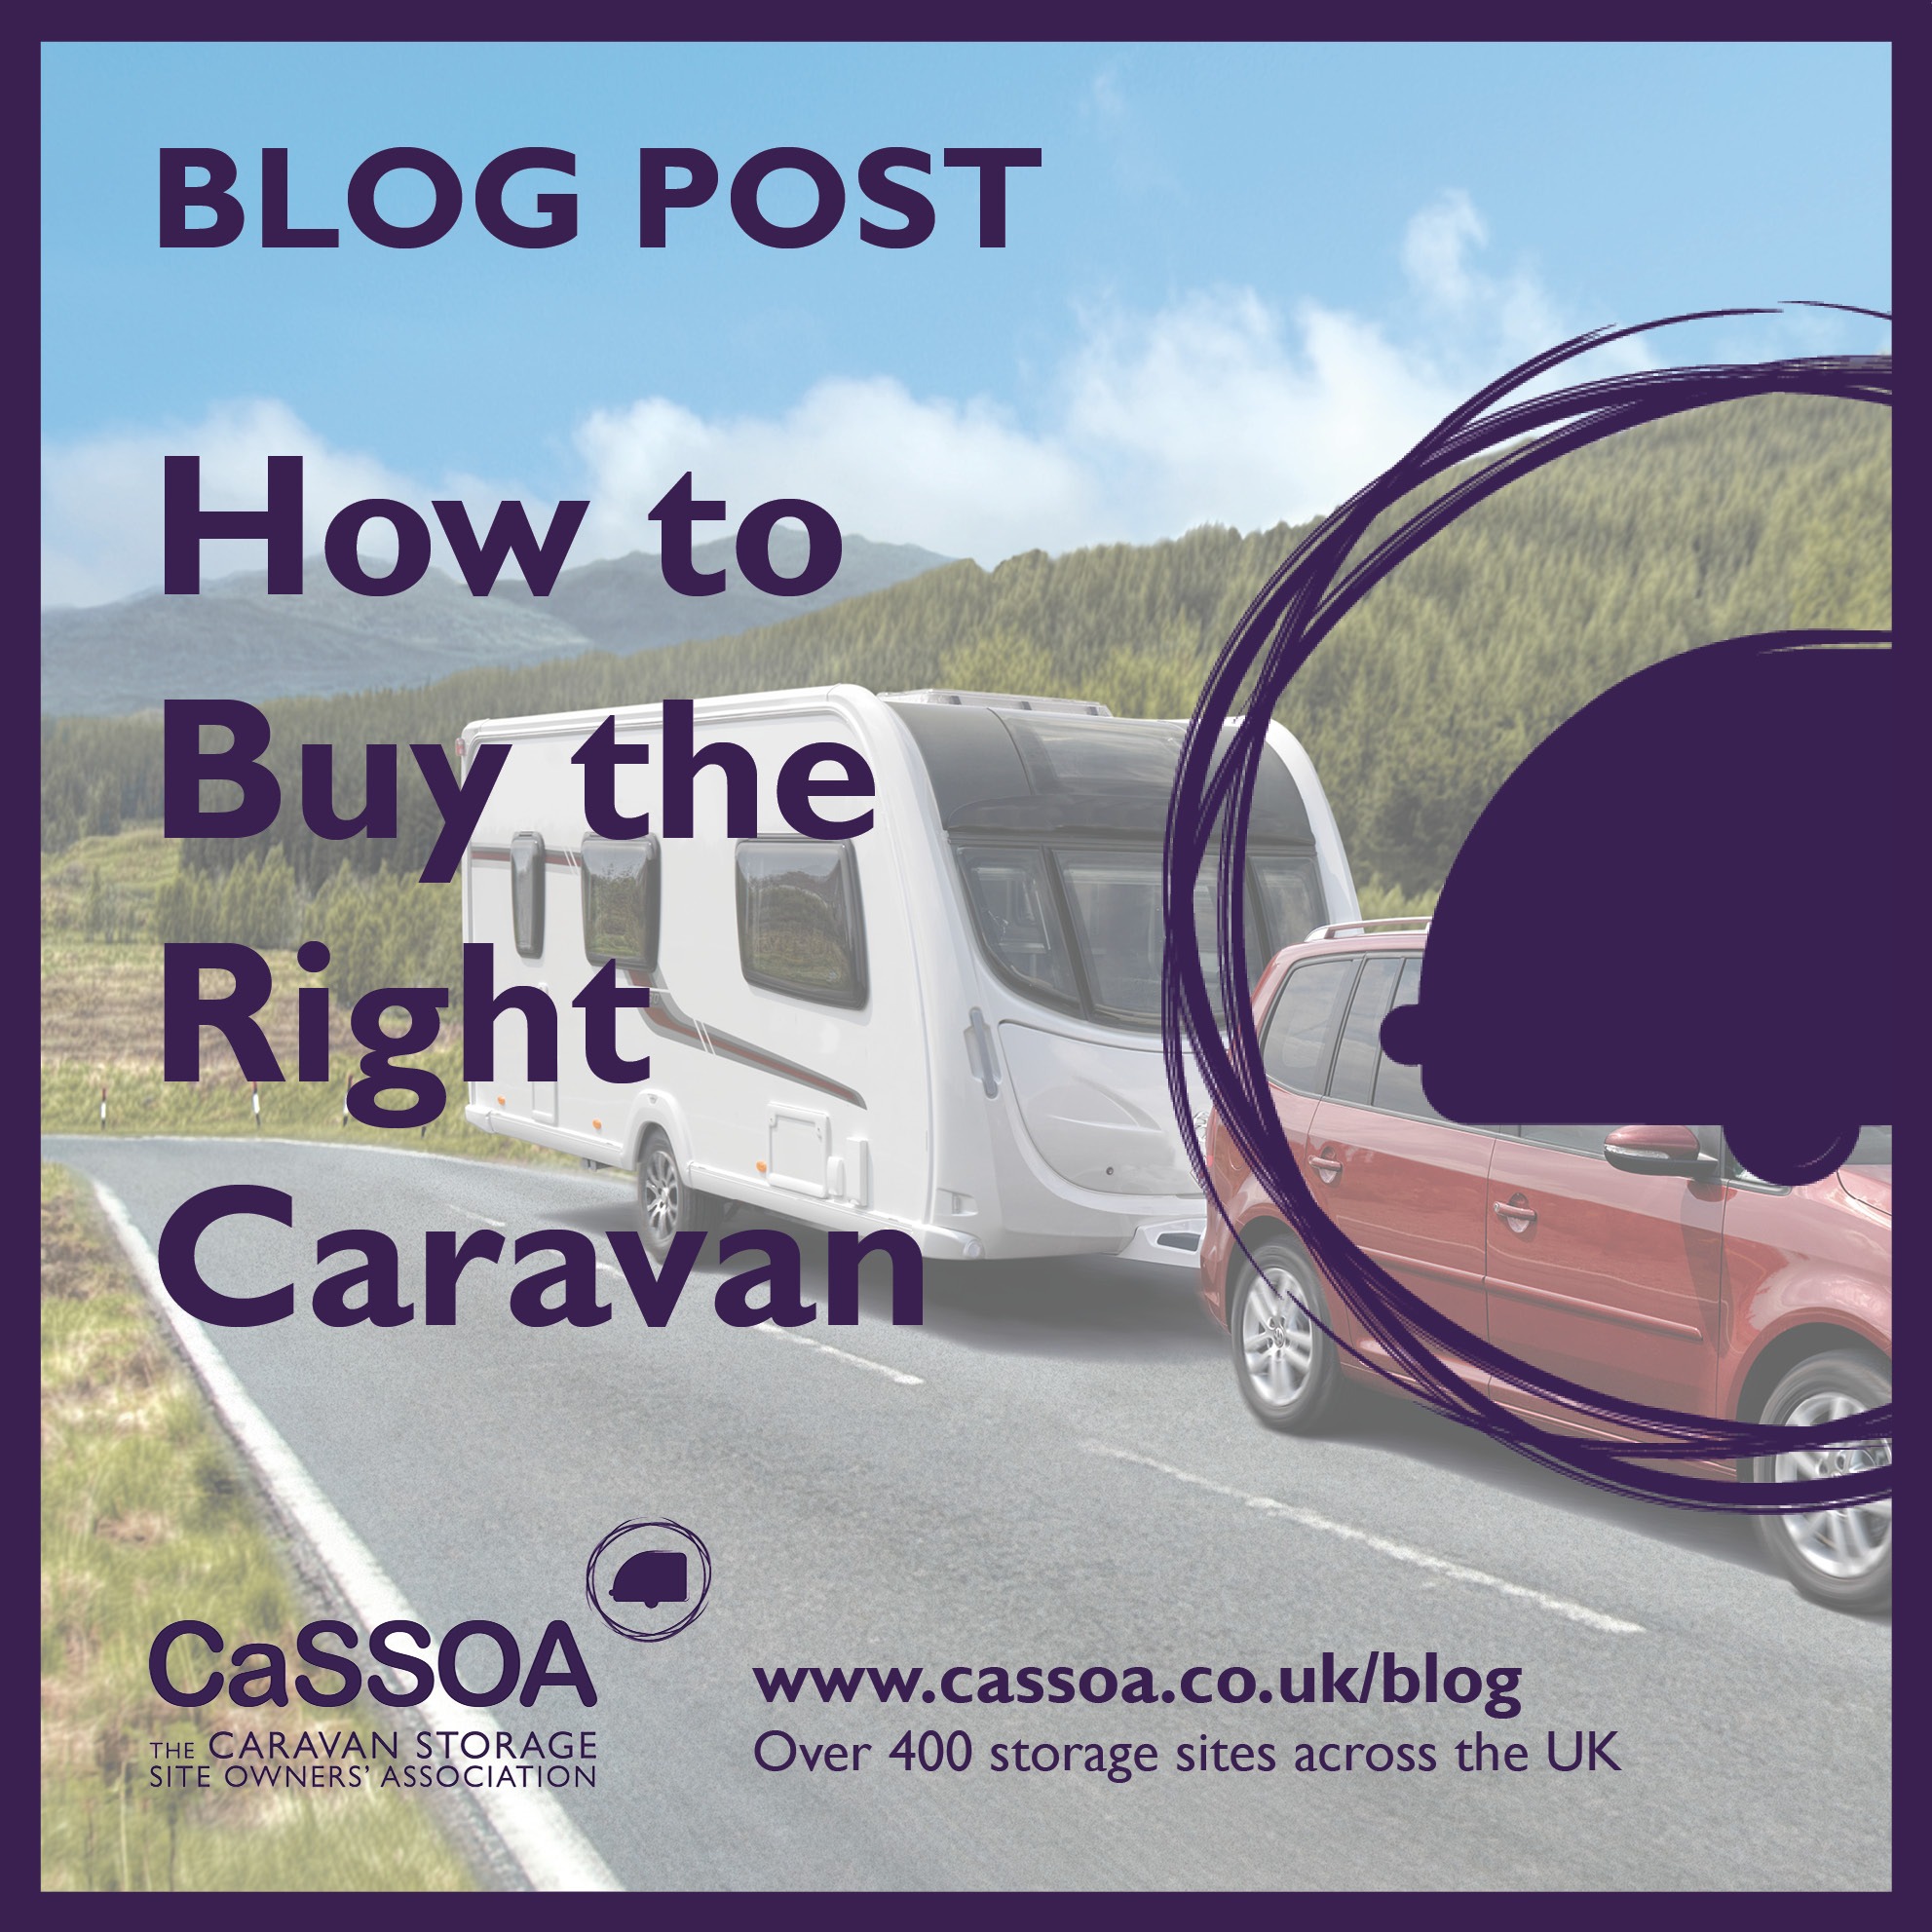 How to Buy the Right Caravan